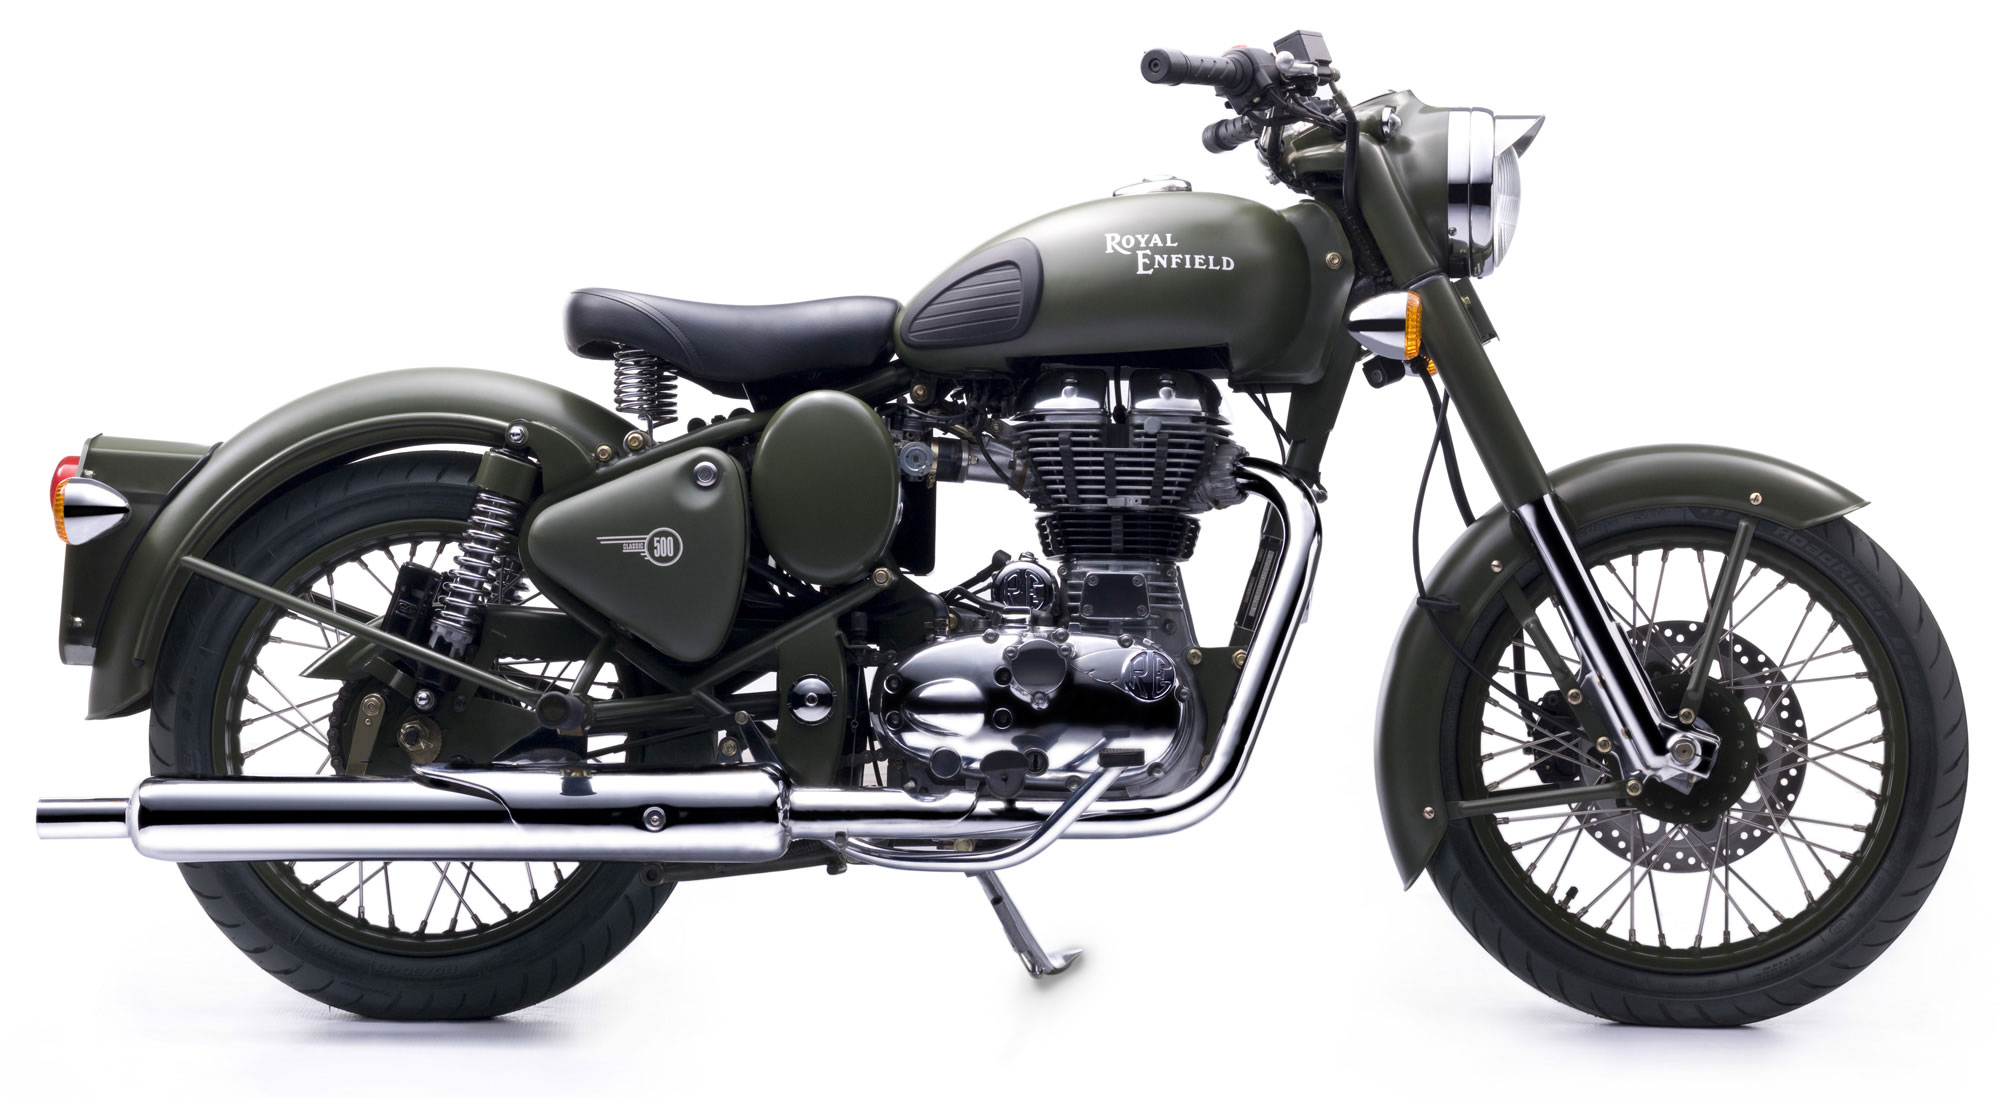 Indiaâ€™s Enduring Love Affair With The Royal Enfield. What Makes The Bullet So Special?